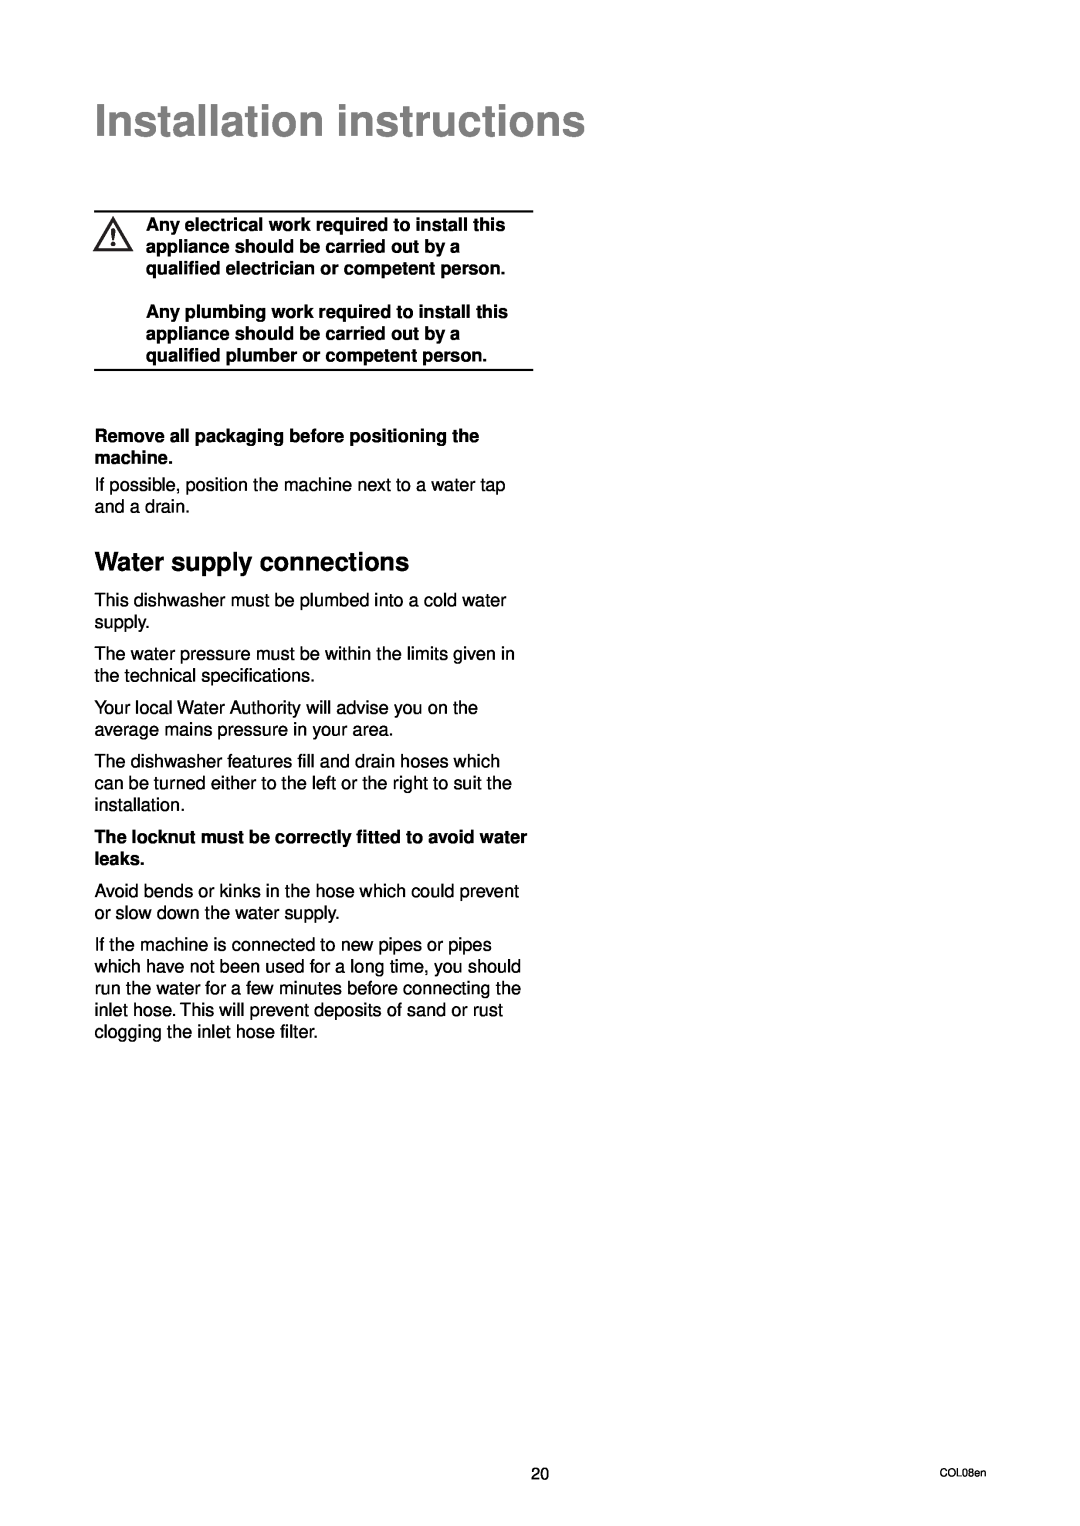 Zanussi DW 914 Installation instructions, Water supply connections, Remove all packaging before positioning the machine 